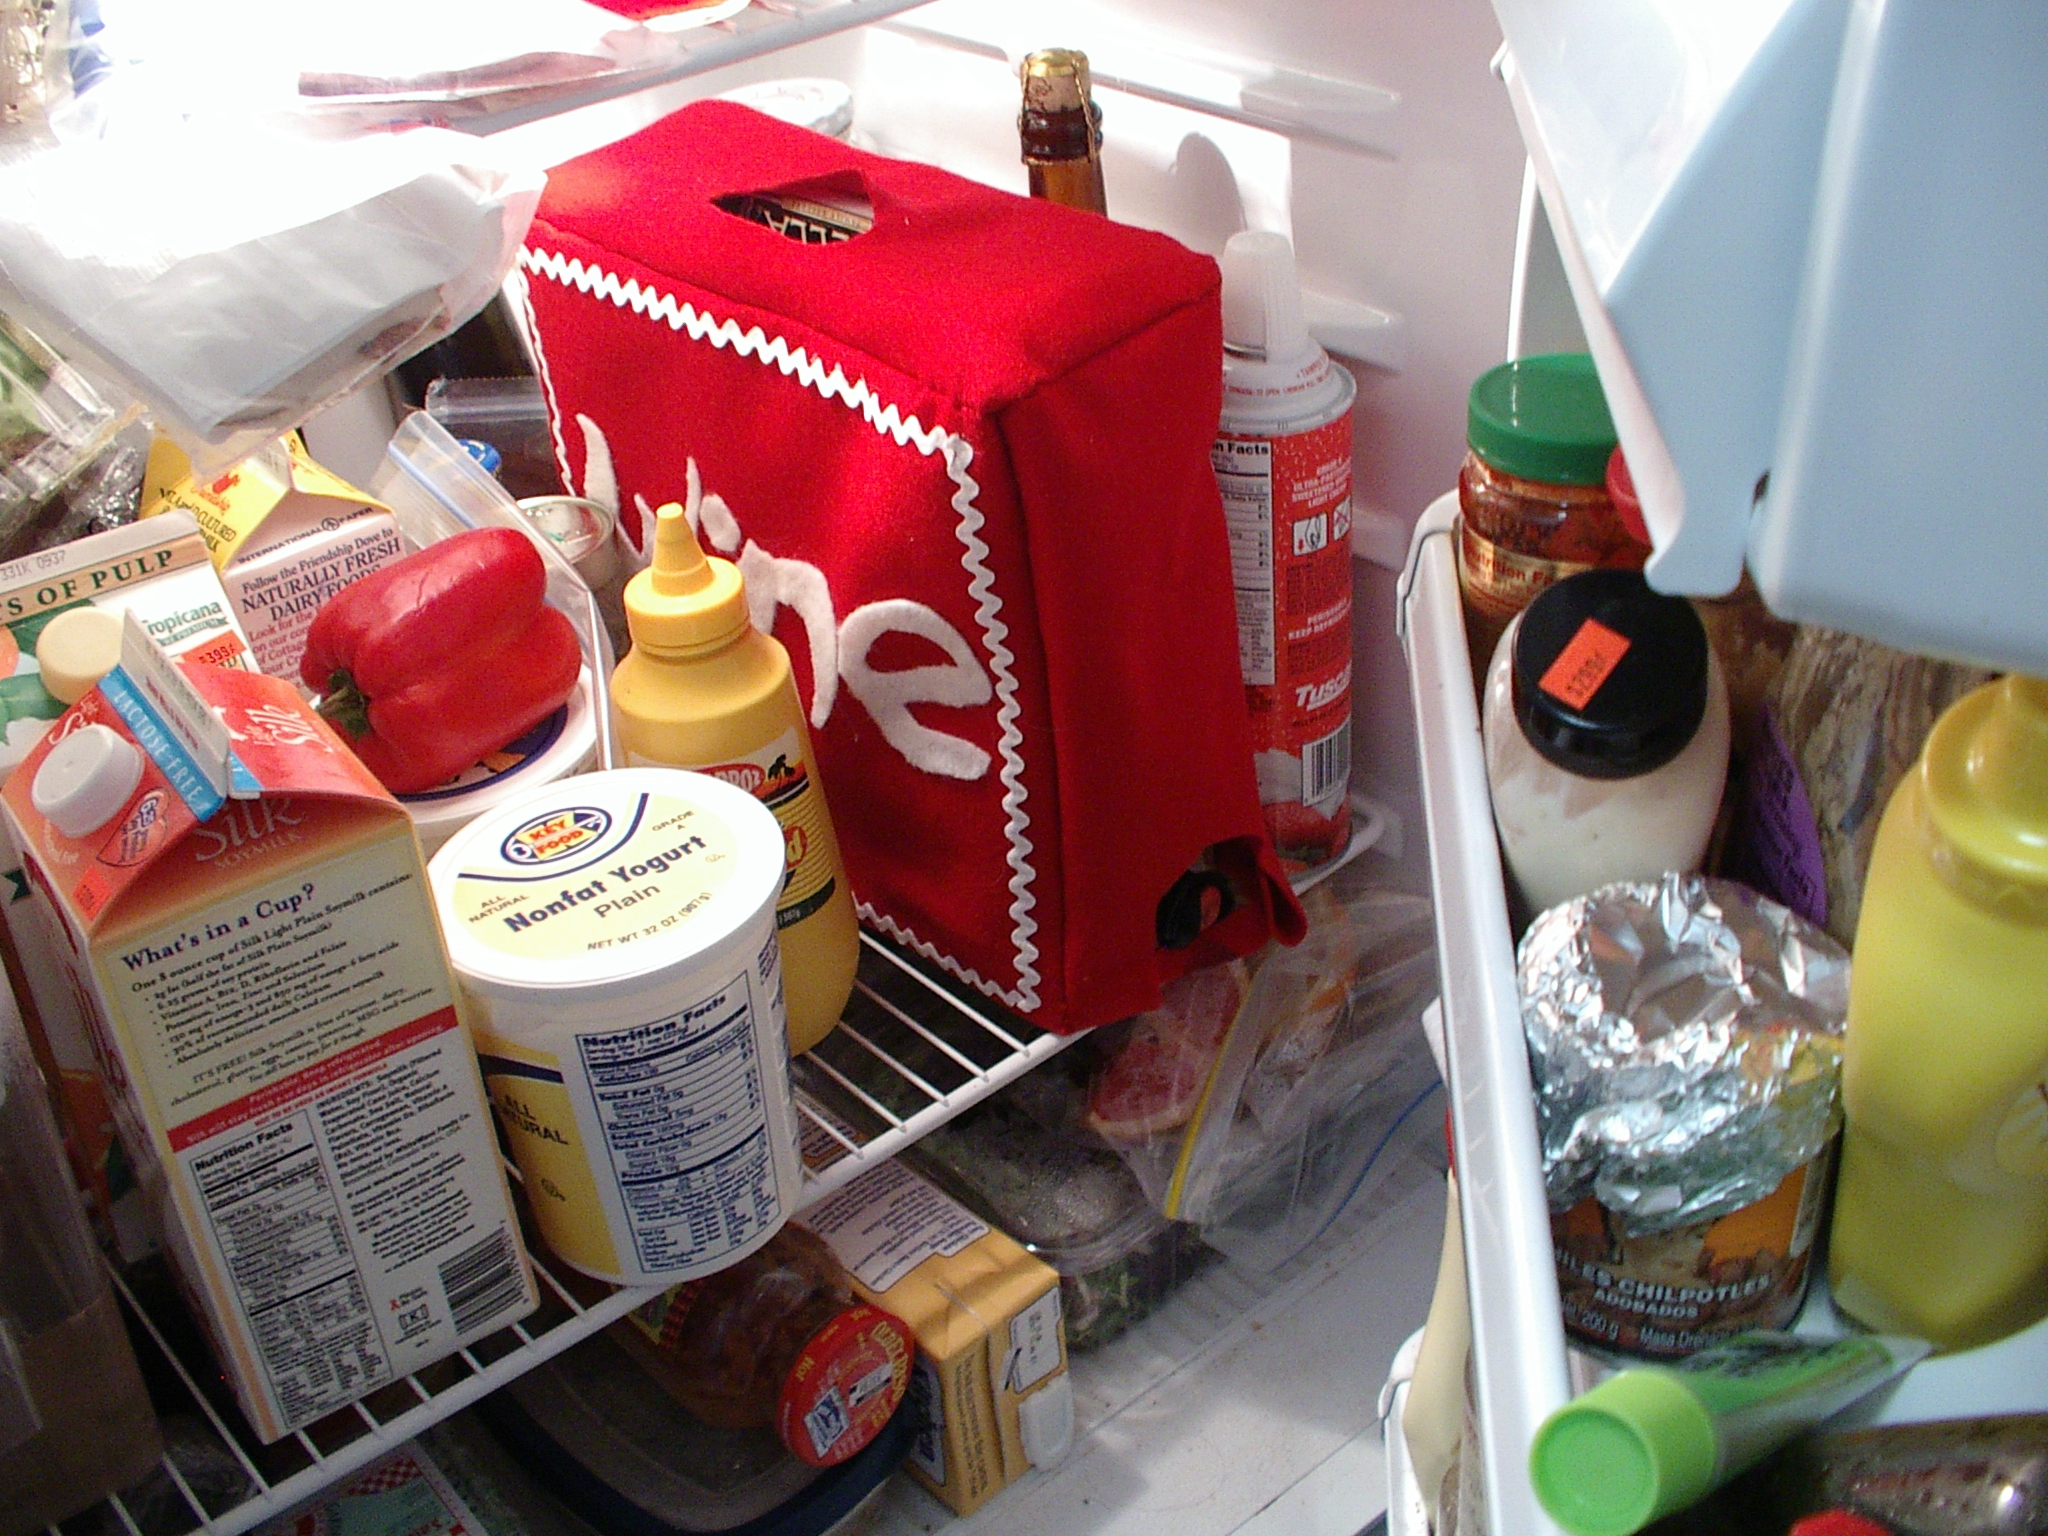 a view from the inside of a refrigerator looking at food